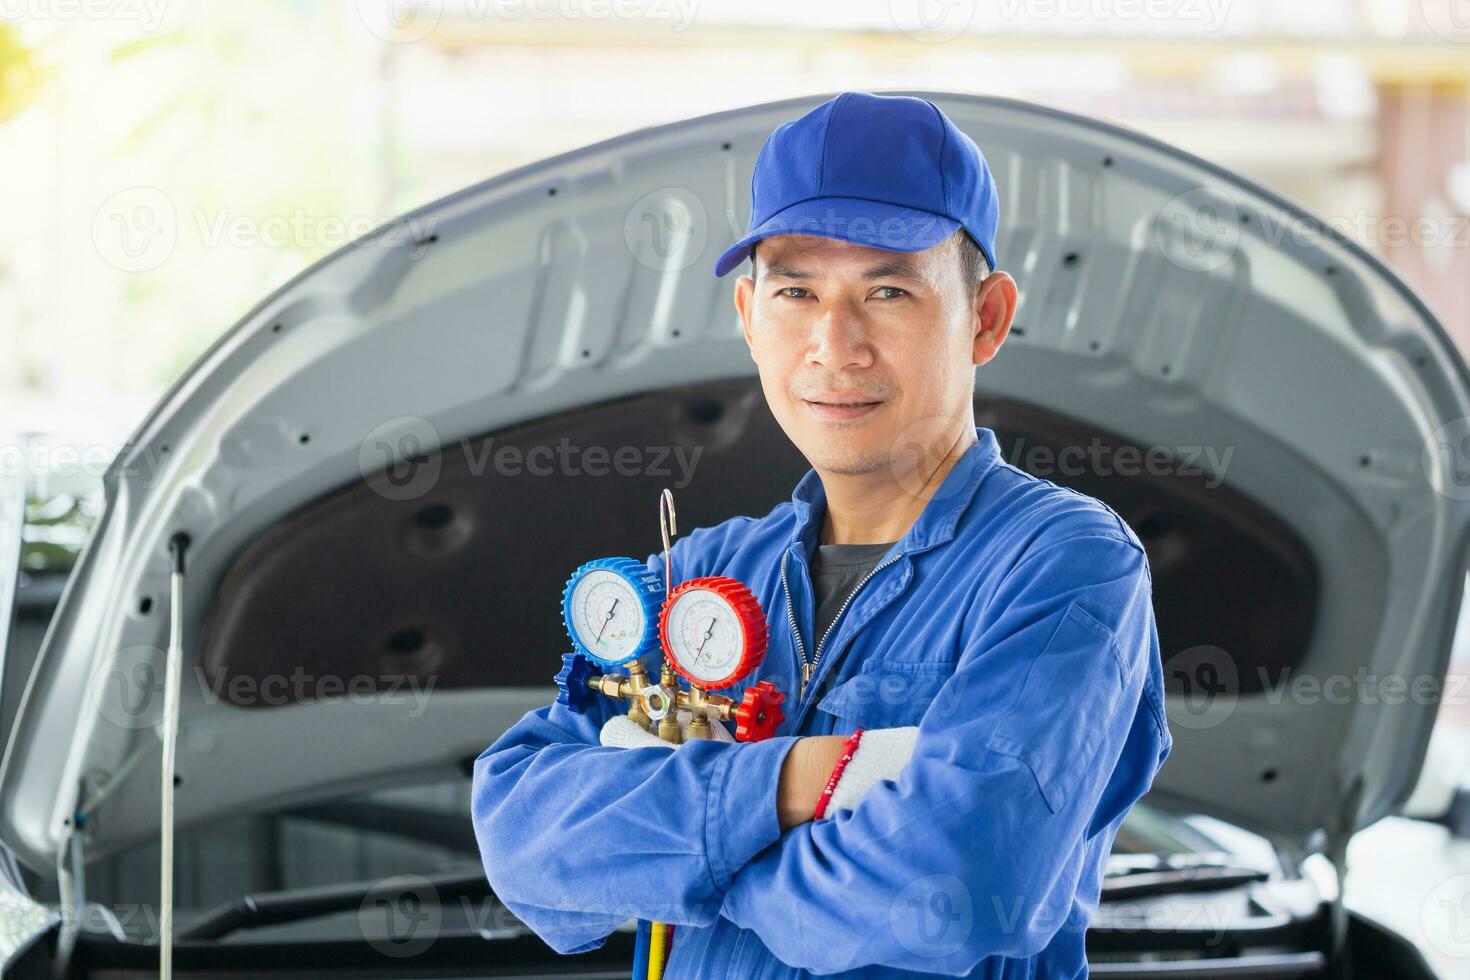 Car Air Conditioning Repair, Repairman holding monitor tool to check and fixed car air conditioner system, Technician check car air conditioning system refrigerant recharge photo